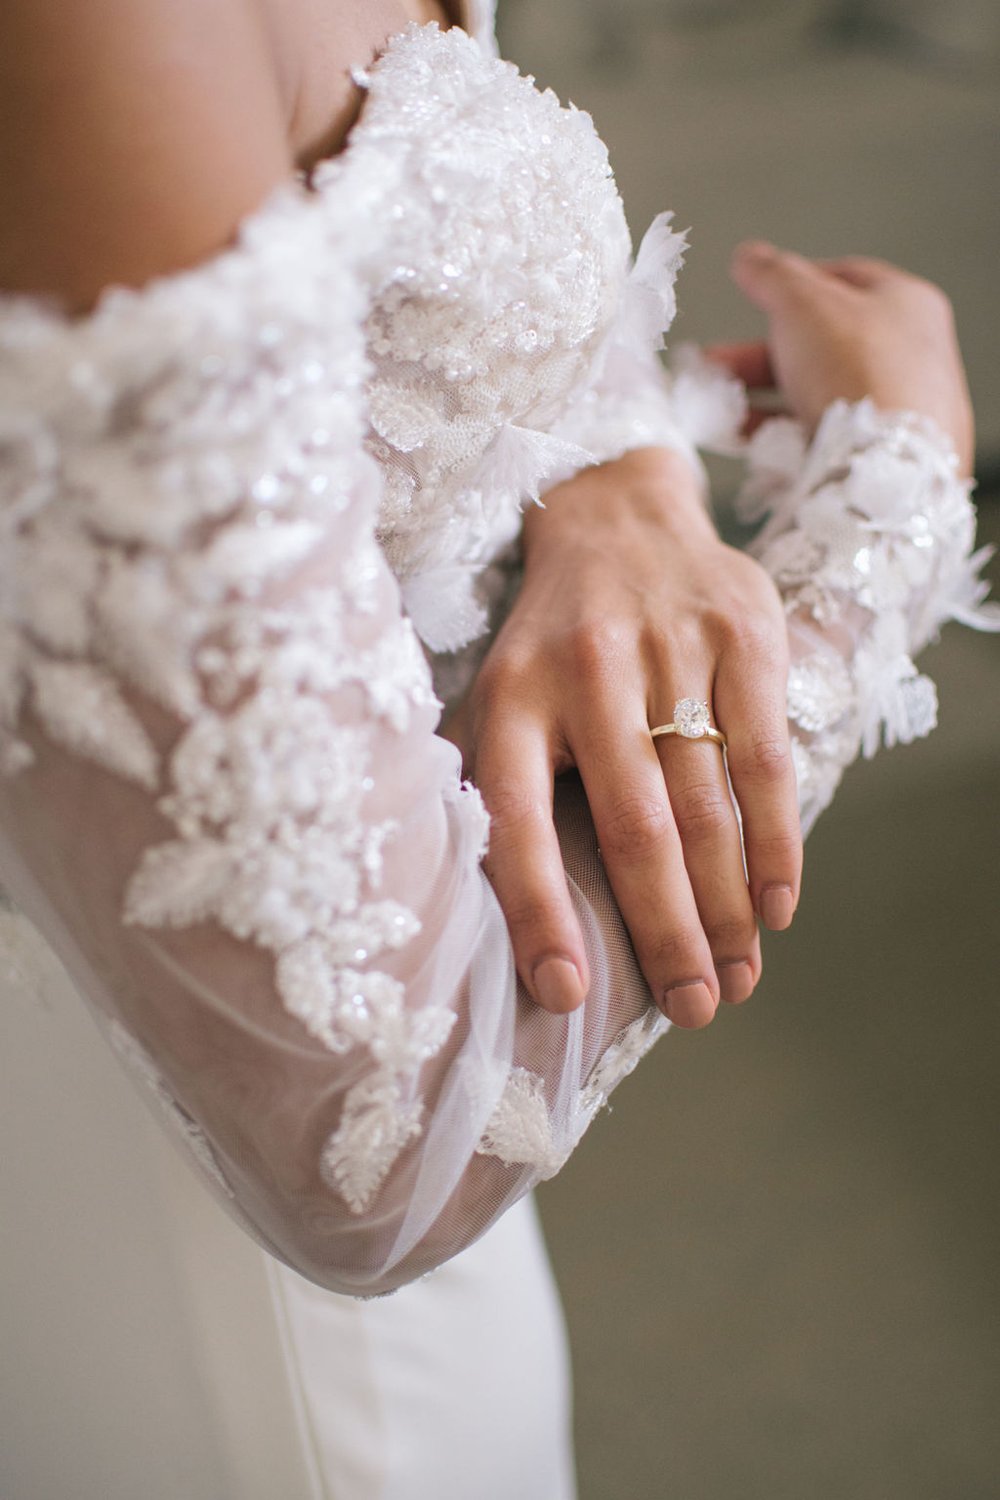 Lace wedding gown with a gold solitaire wedding engagement ring.